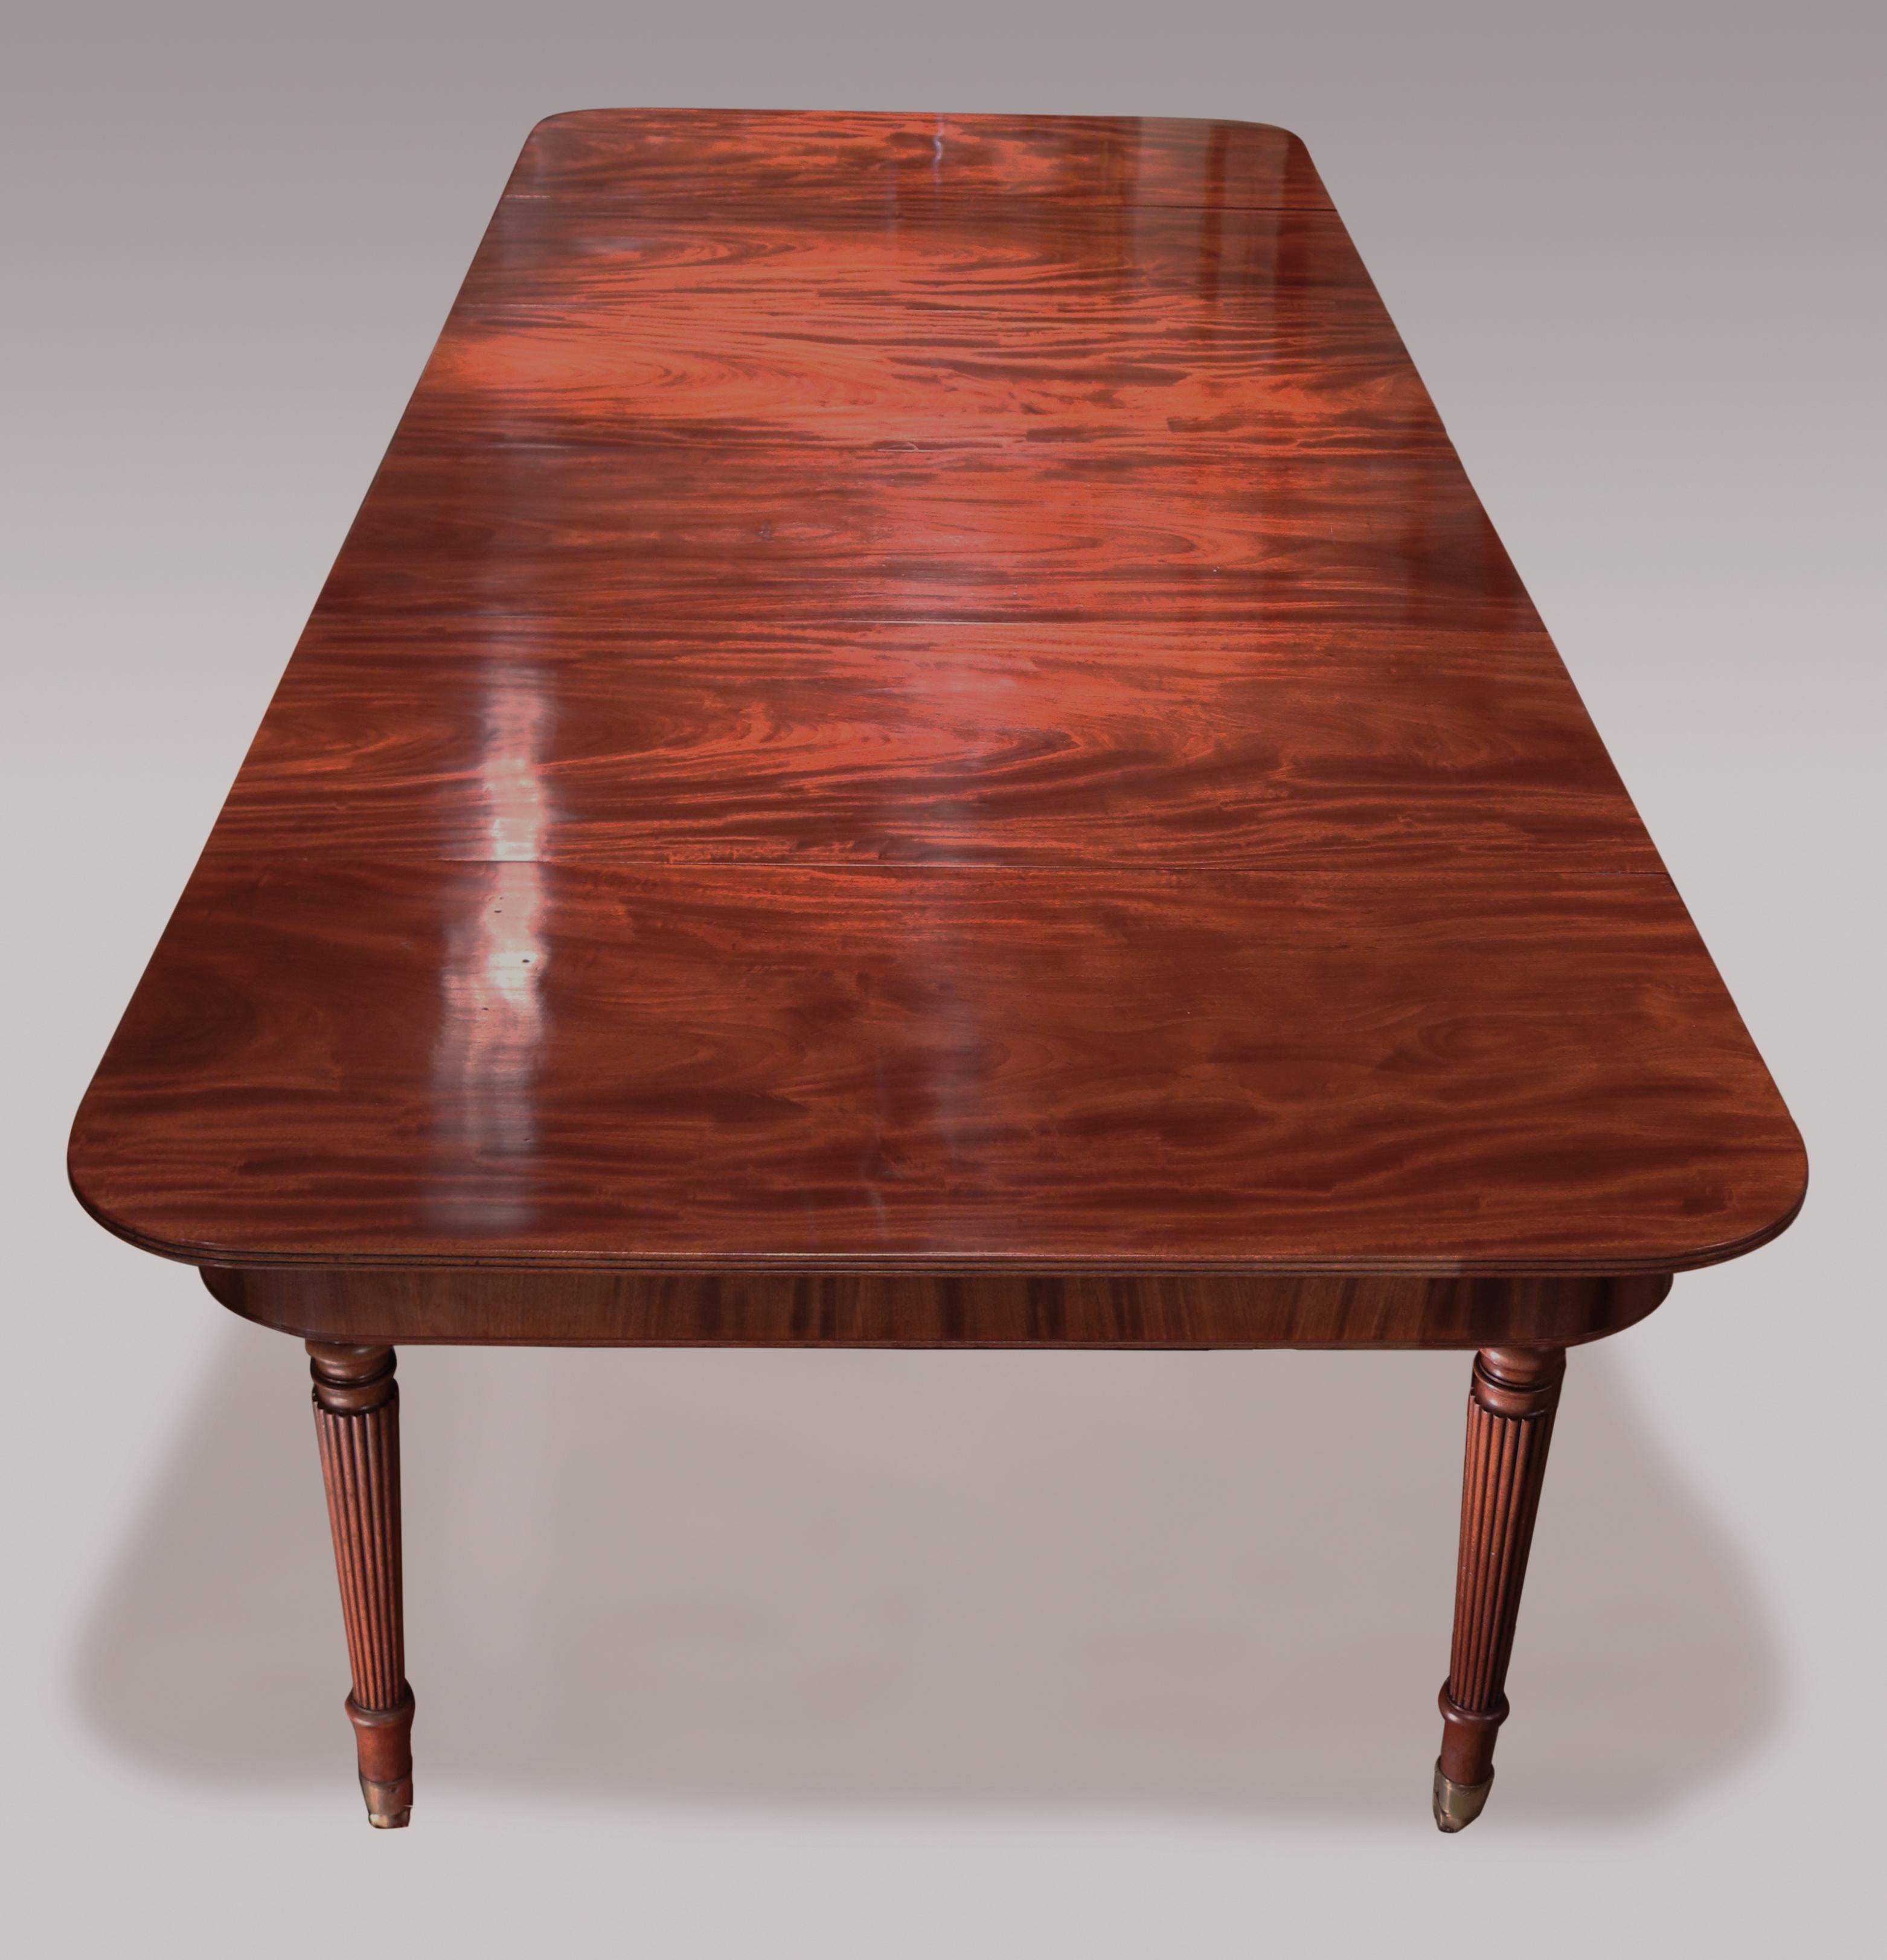 English George III Regency Gillows Mahogany Extending Dining Table